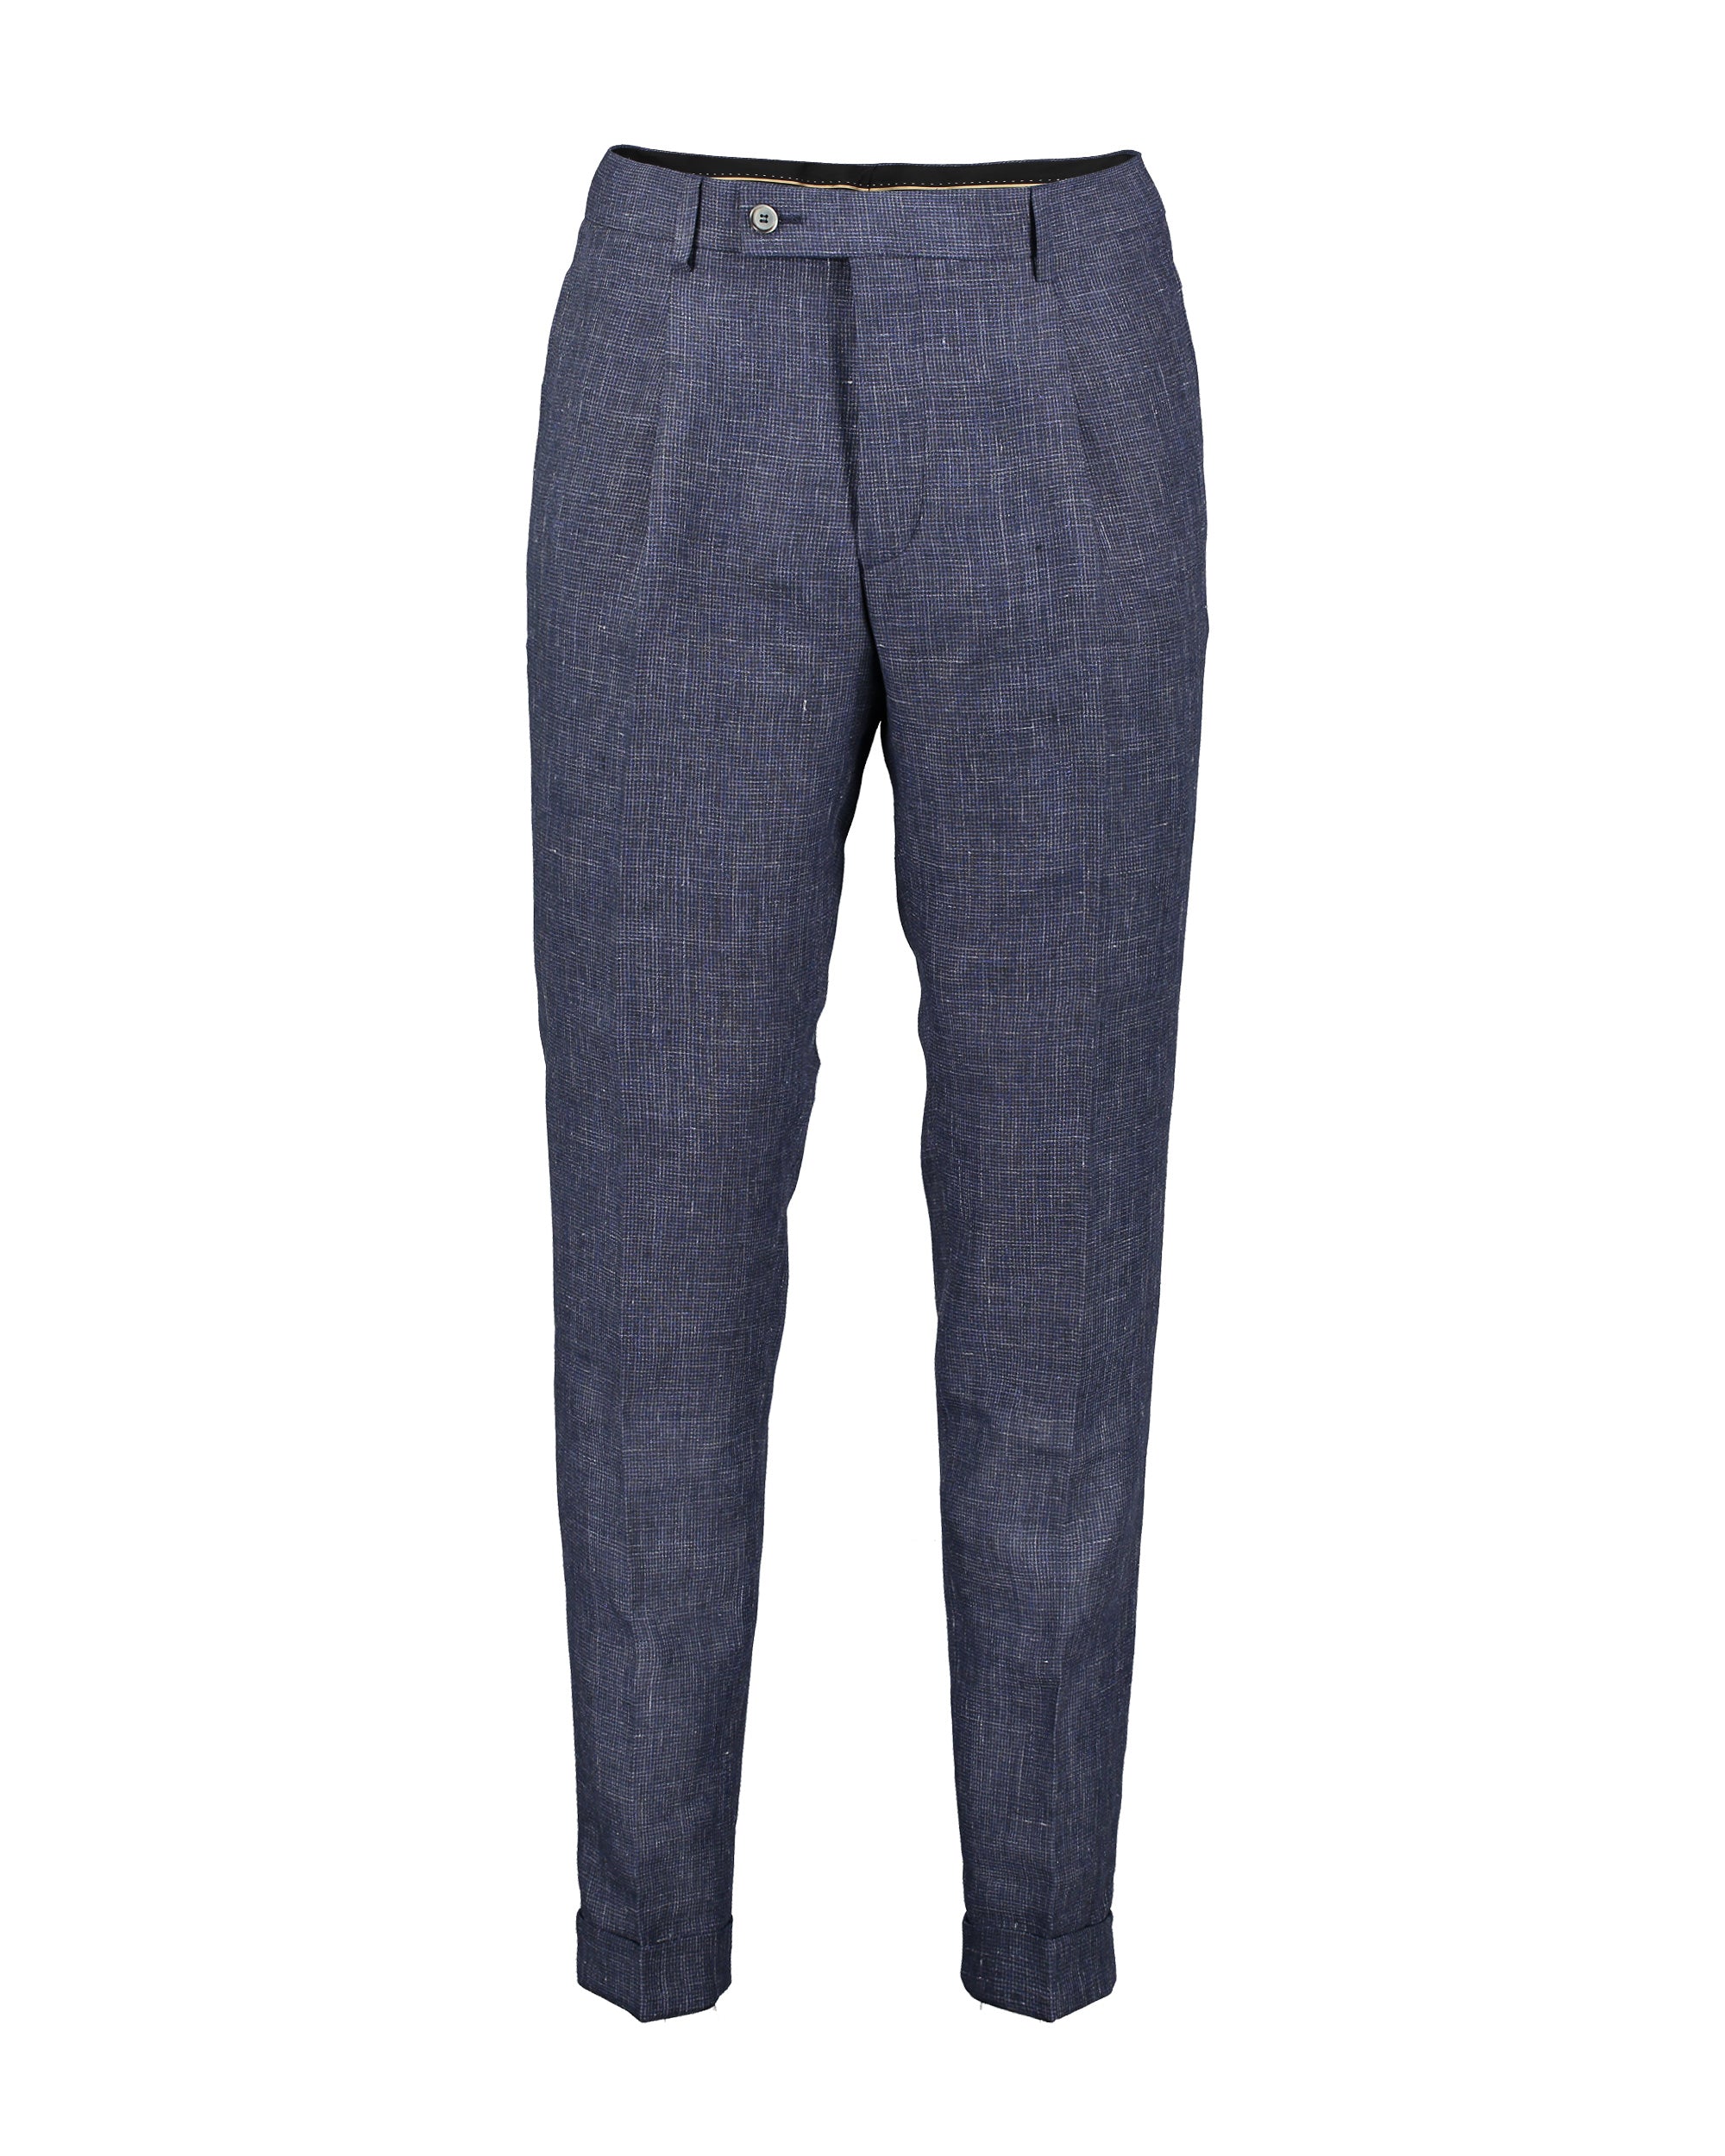 Alex Navy Houndstooth Linen Trousers